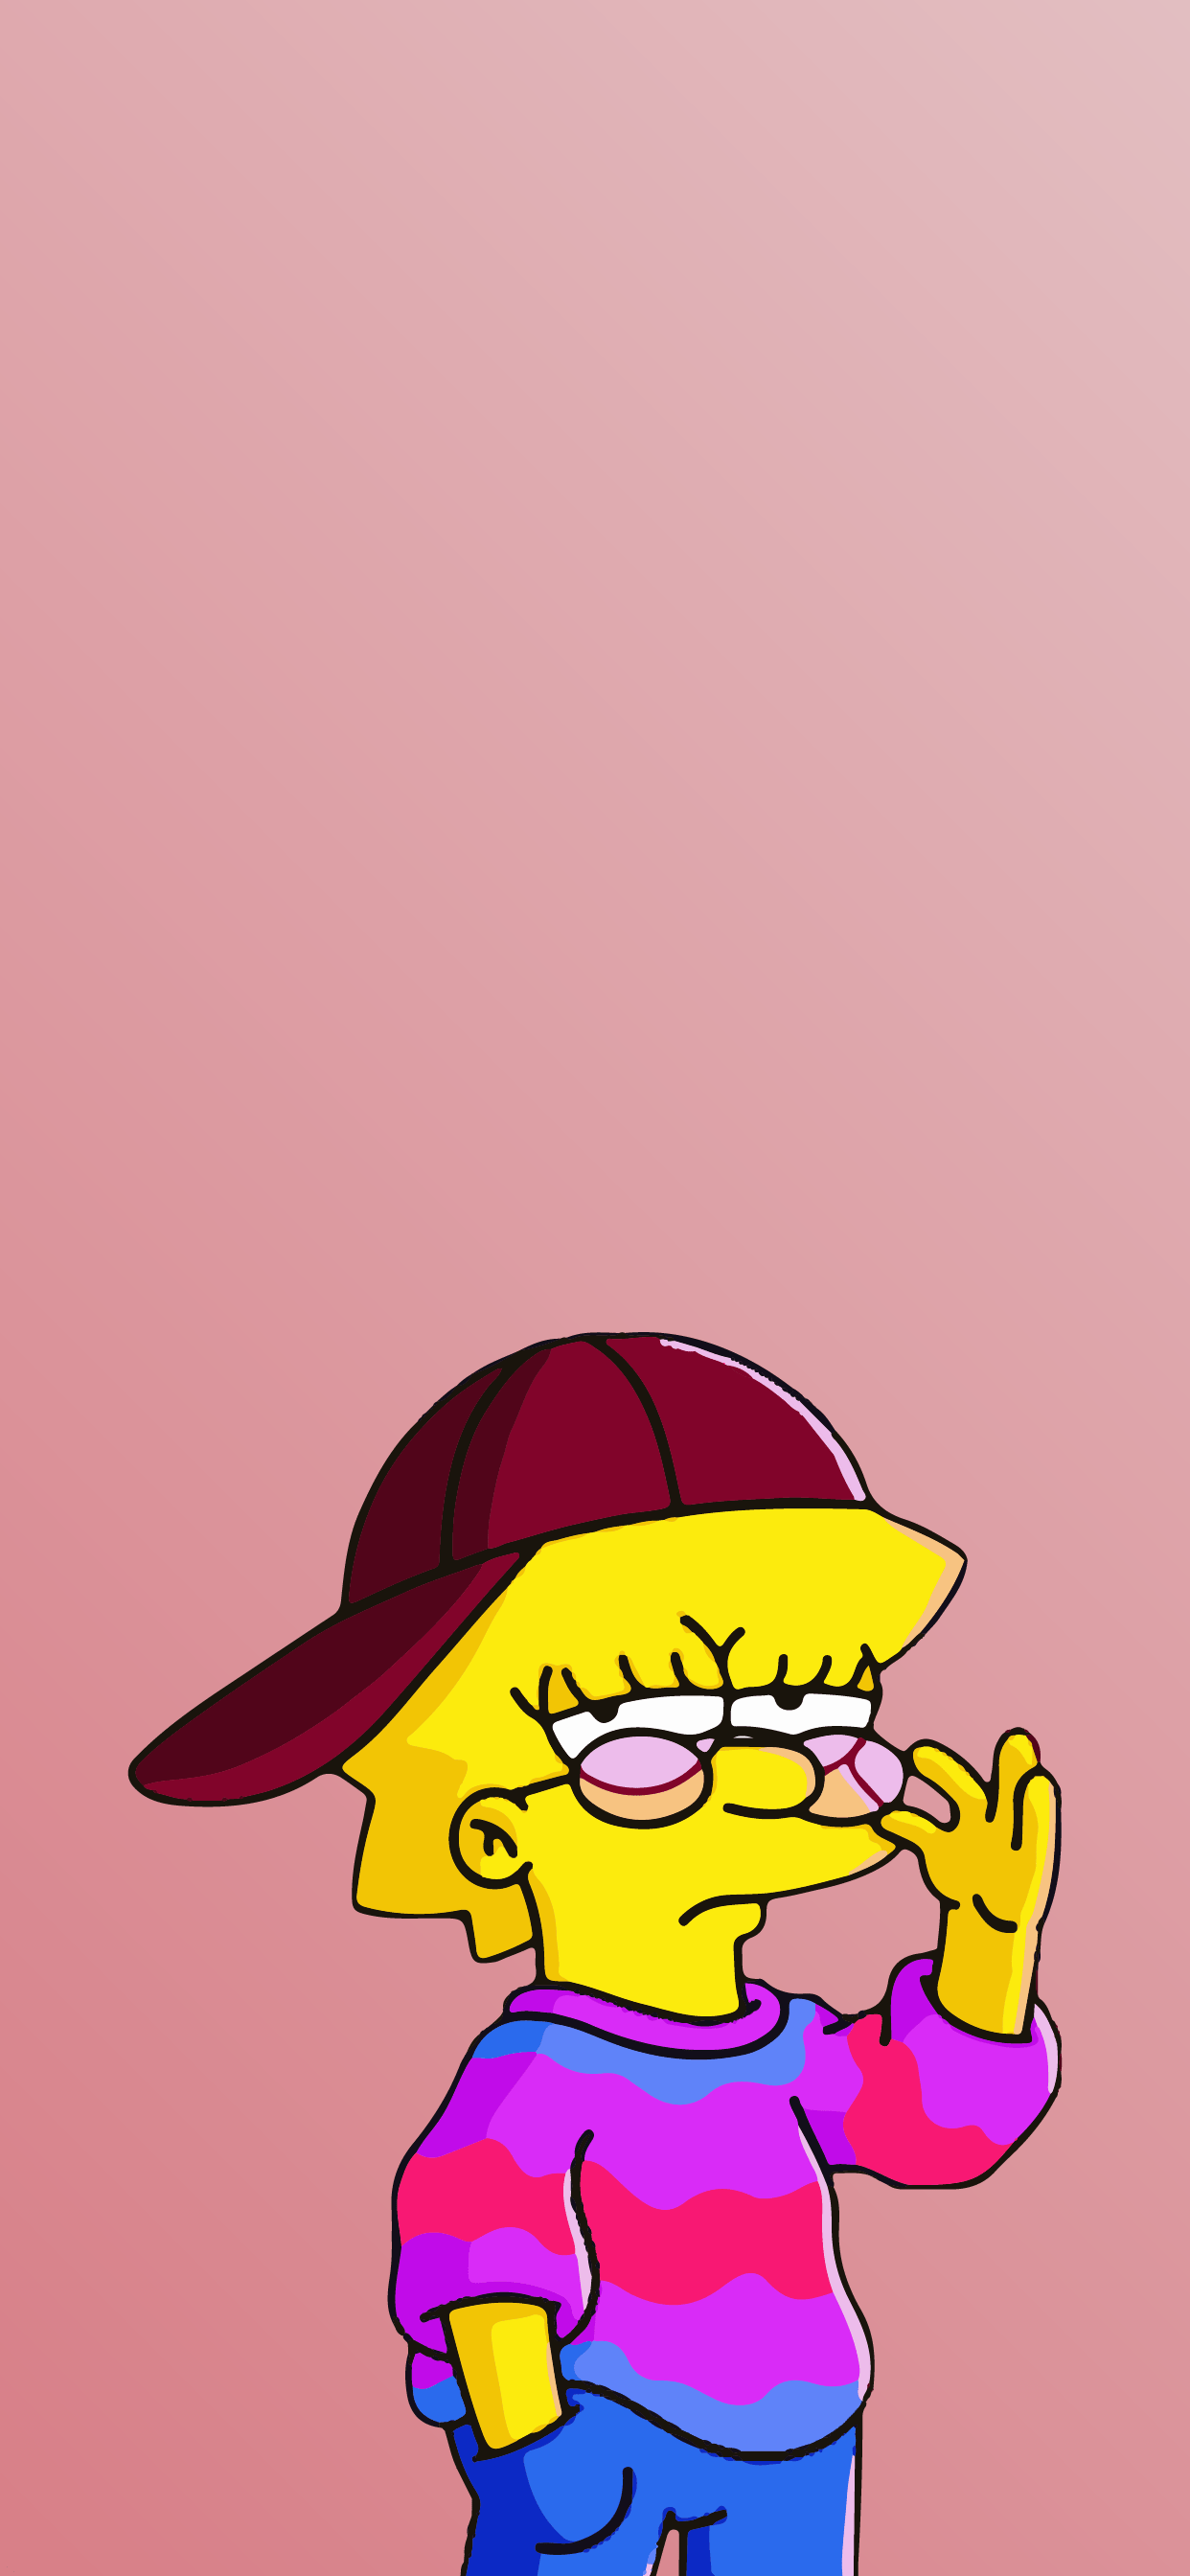 A remake of a famous wallpaper. Simpson wallpaper iphone, Mood wallpaper, Cartoon wallpaper iphone